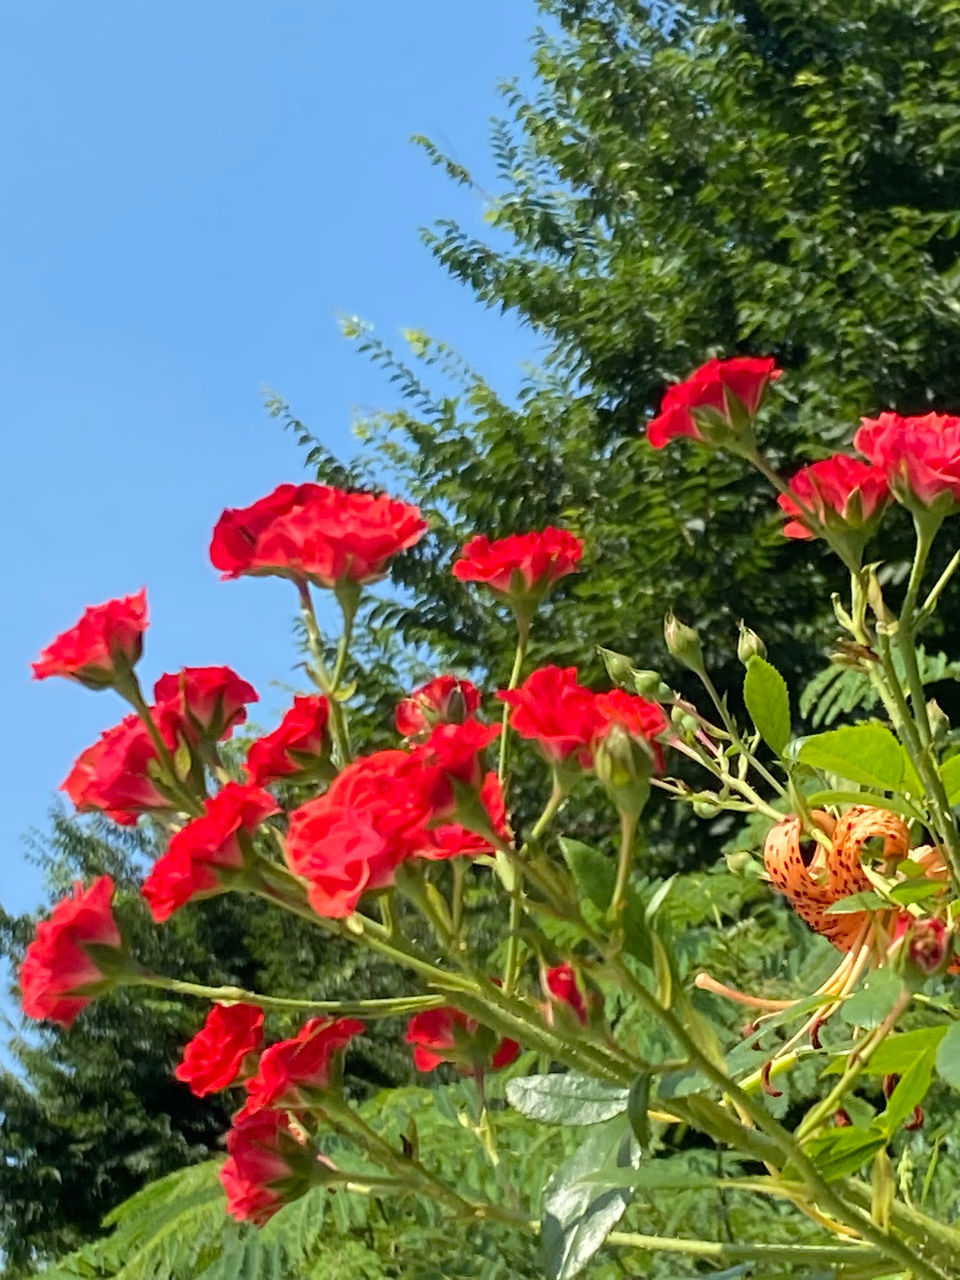 plant, flower, red, nature, flowering plant, beauty in nature, growth, freshness, no people, sky, tree, day, green, fragility, leaf, clear sky, plant part, garden, outdoors, petal, close-up, blue, shrub, flower head, low angle view, inflorescence, botany, sunlight